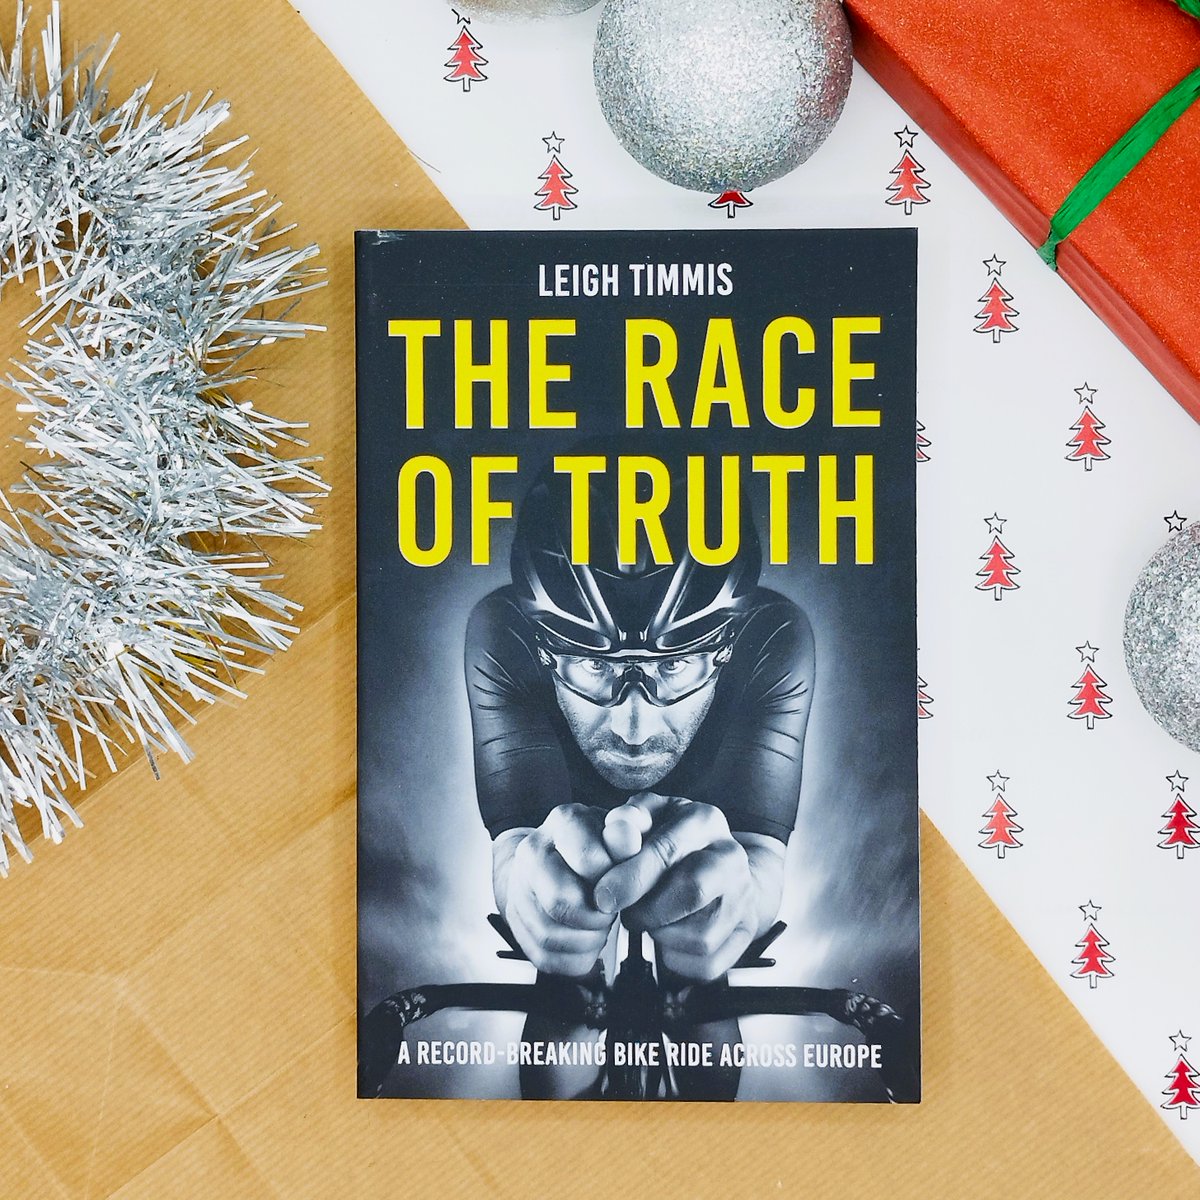 The Race of Truth, @leightimmis's exhilirating account of his record-breaking ride across Europe, is the ideal present for the cyclist in your life. Discover just what goes into an ultra-endurance race and the lessons we can all take from those who push themselves to the extreme.